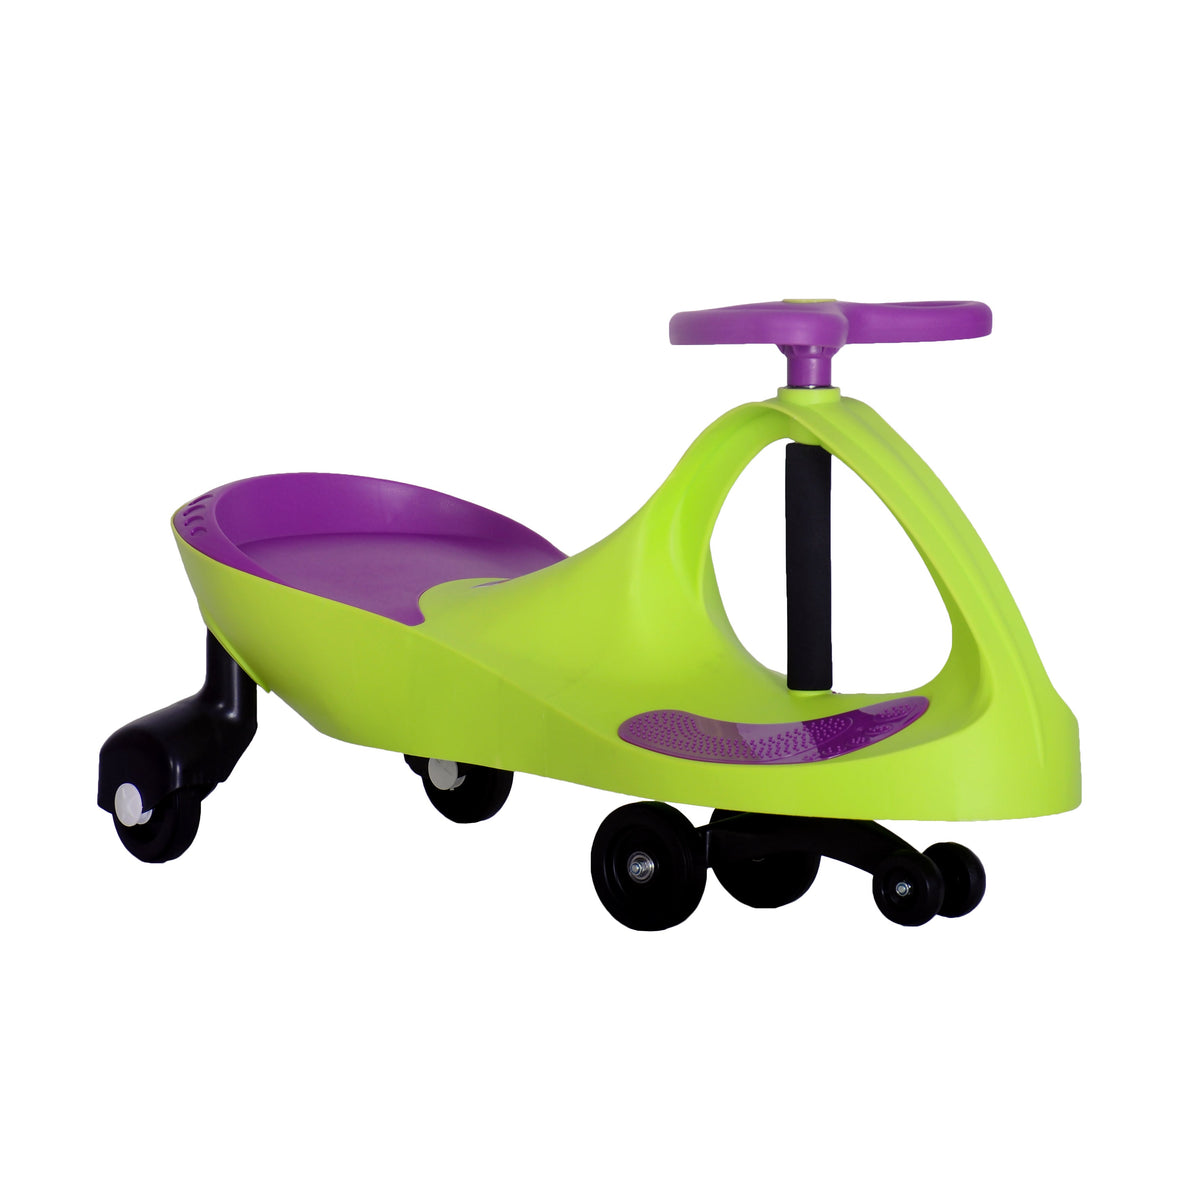 Ride-on Swing Car (Green) Peddle-free, Fun & Fast for Children